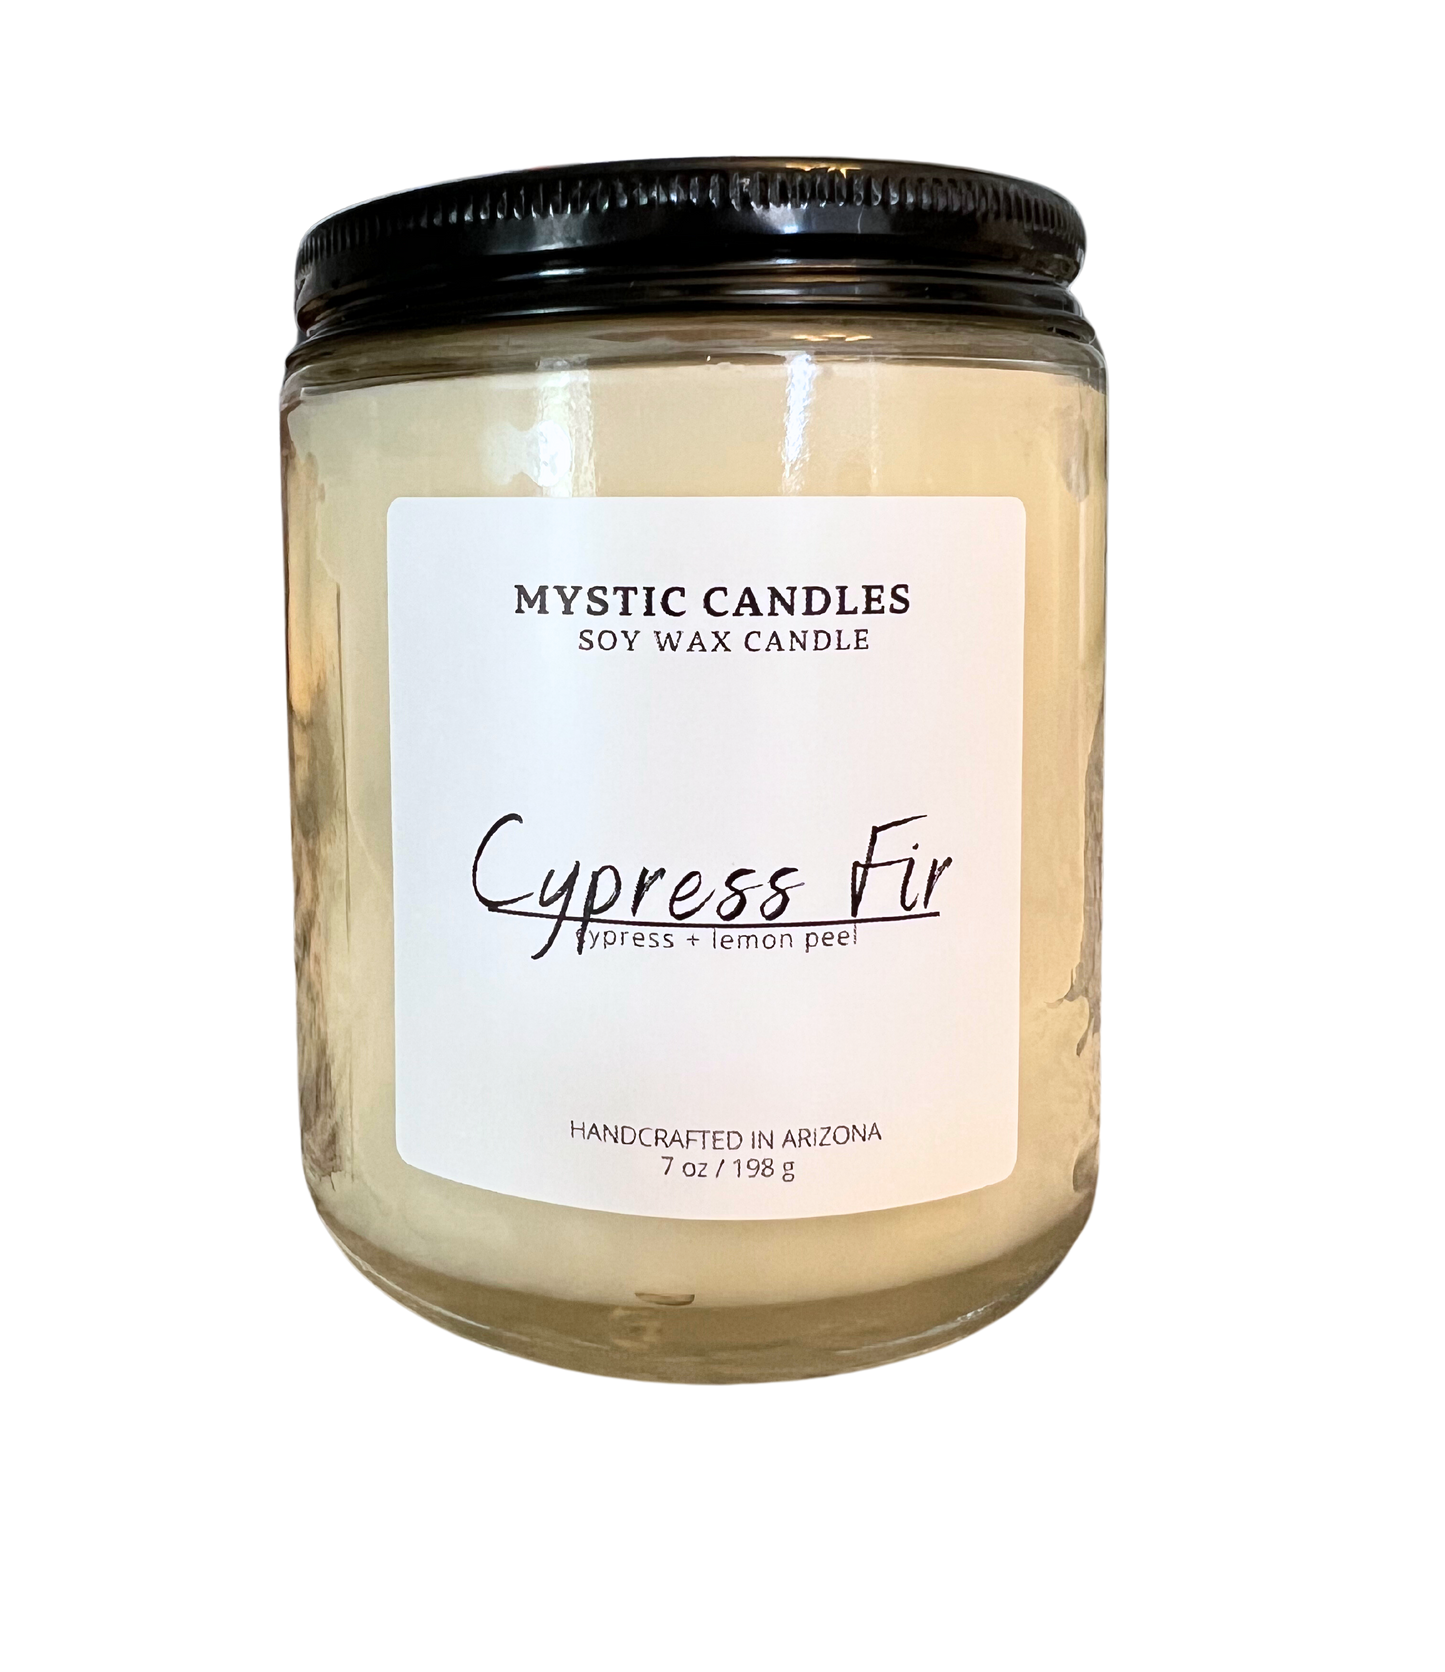 Cypress Fir Candle - Mystic Candles and Soaps LLC